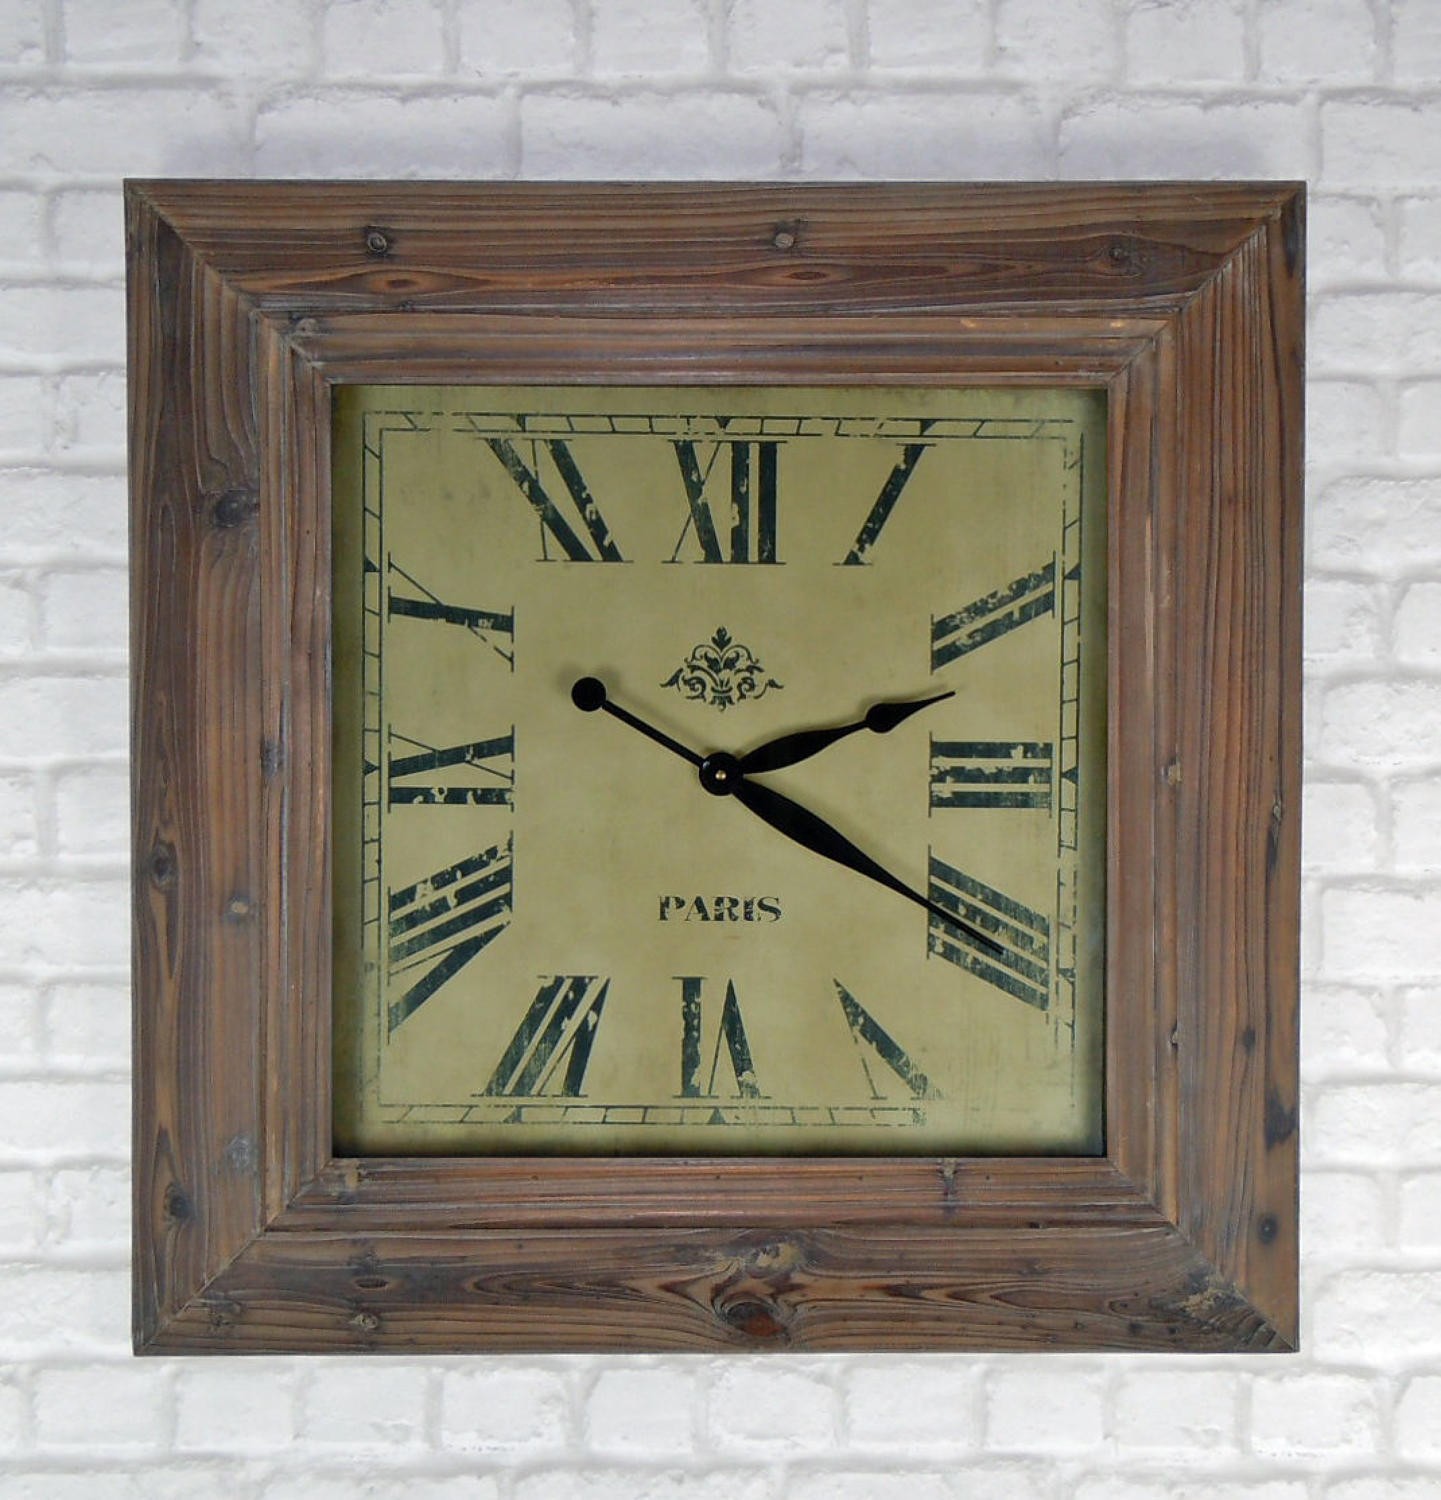 Large square wooden wall clock in clocks